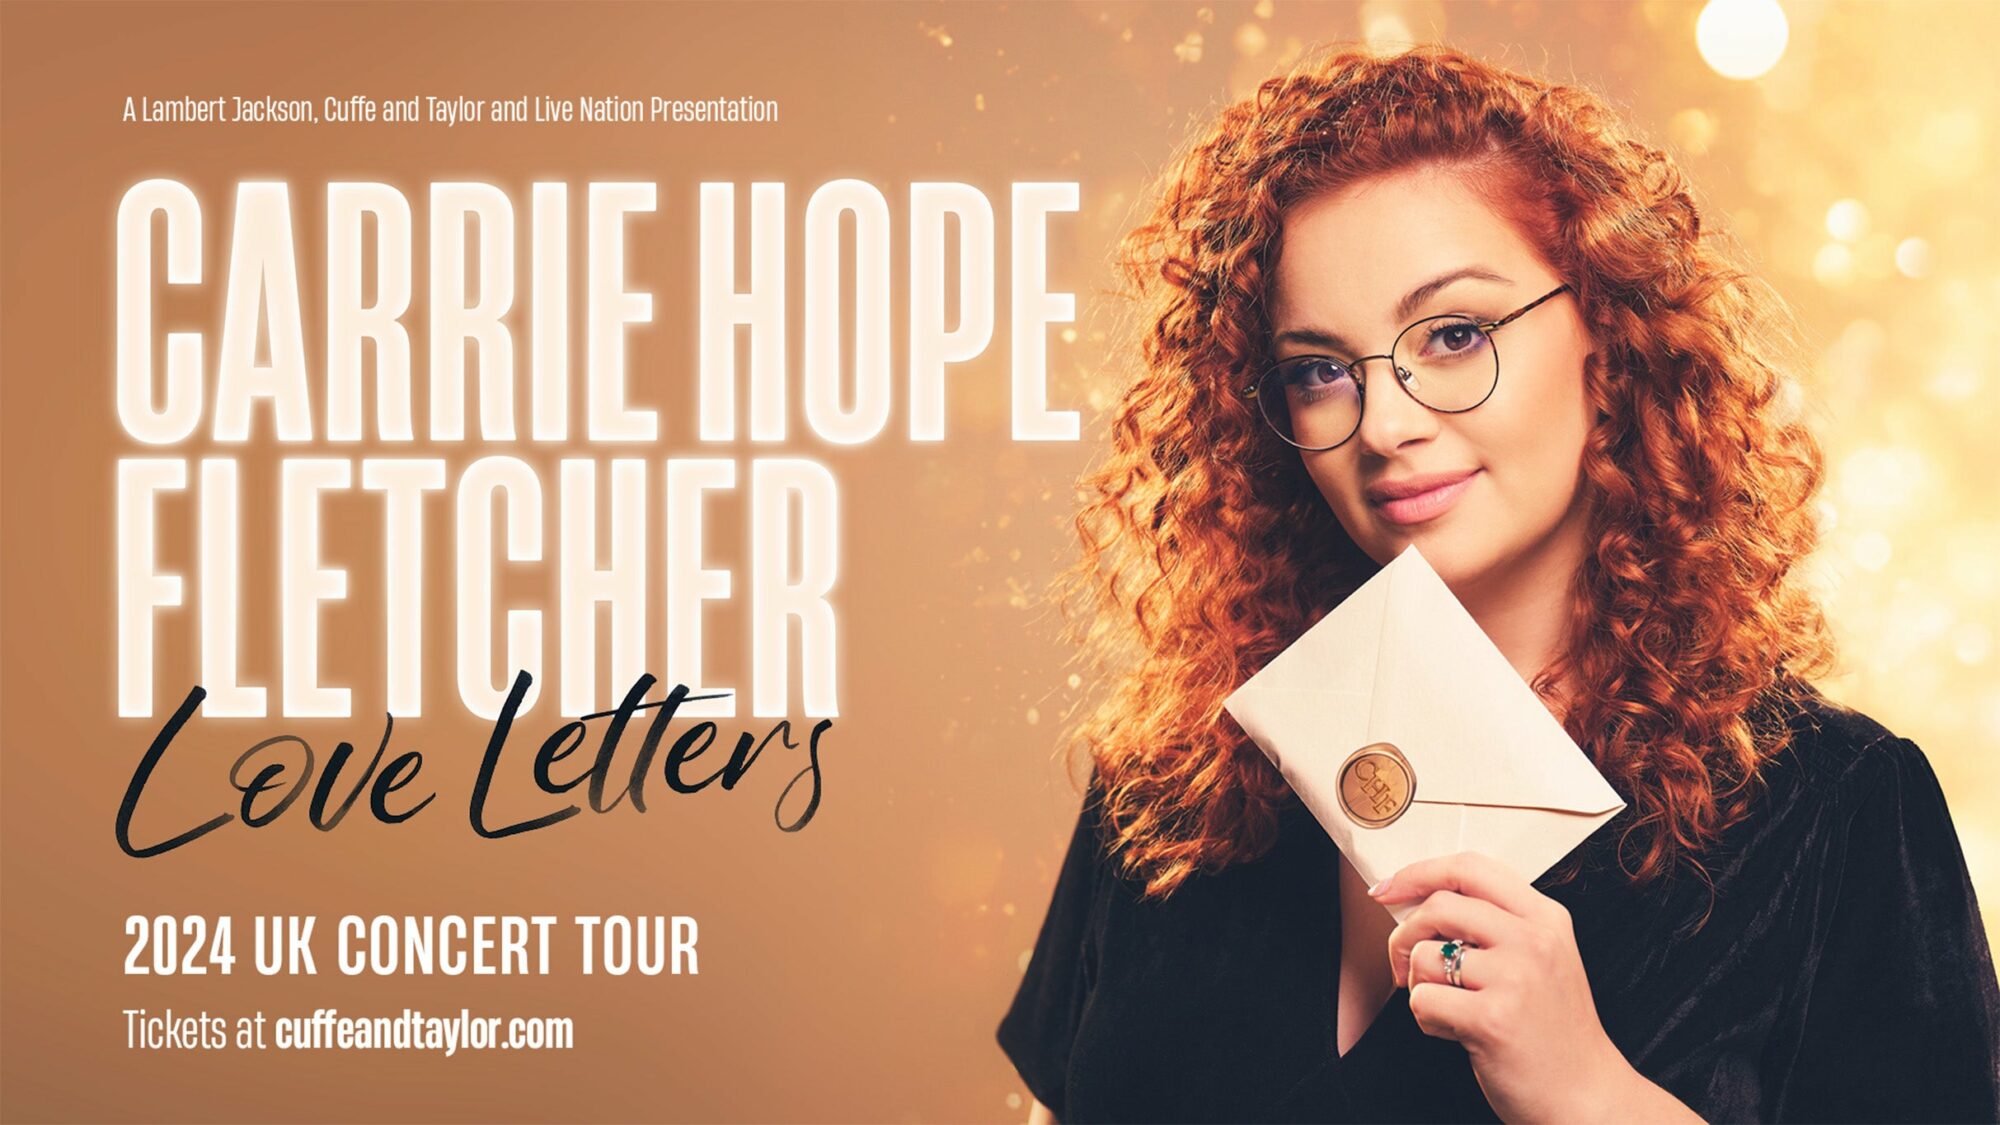 Image name Carrie Hope Fletcher Love Letters at York Barbican York the 34 image from the post Events in Yorkshire.com.